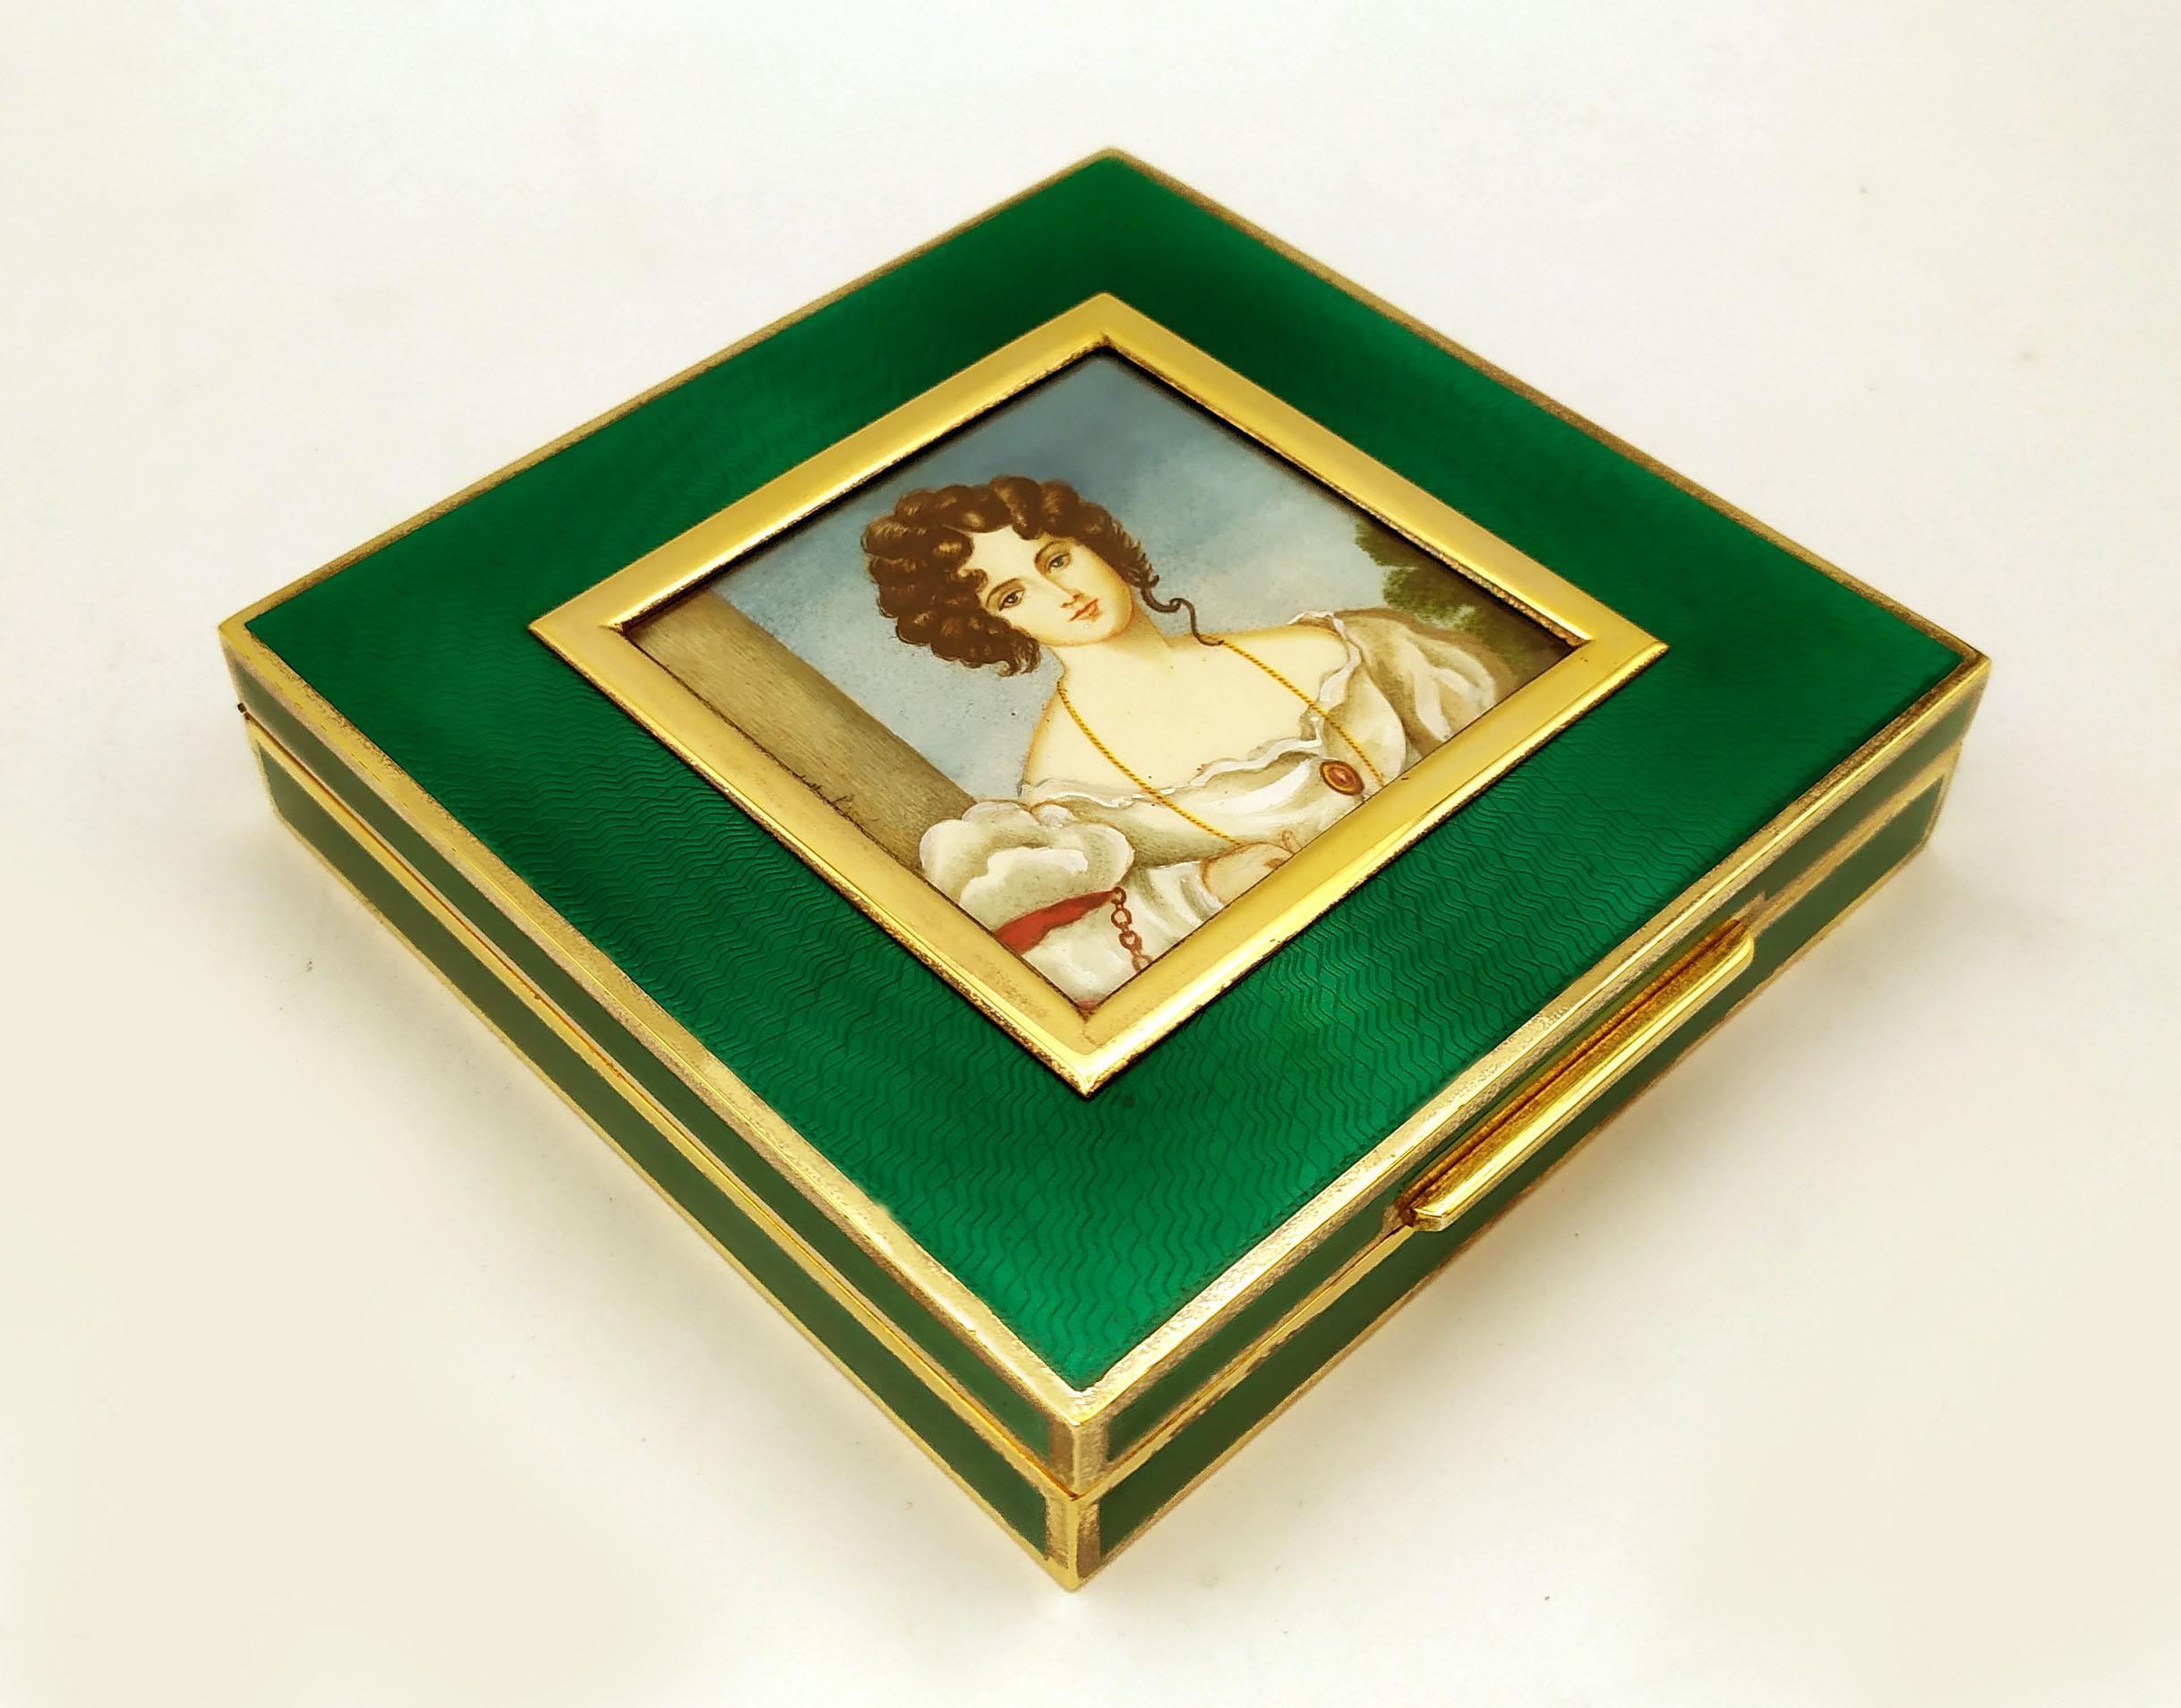 Square box in 925/1000 sterling silver gold plated with translucent fired enamel on guillochè also on the sides. In the center, a beautiful hand painted tempera miniature on a vegetable ivory plate depicting the portrait of a 19th century lady,